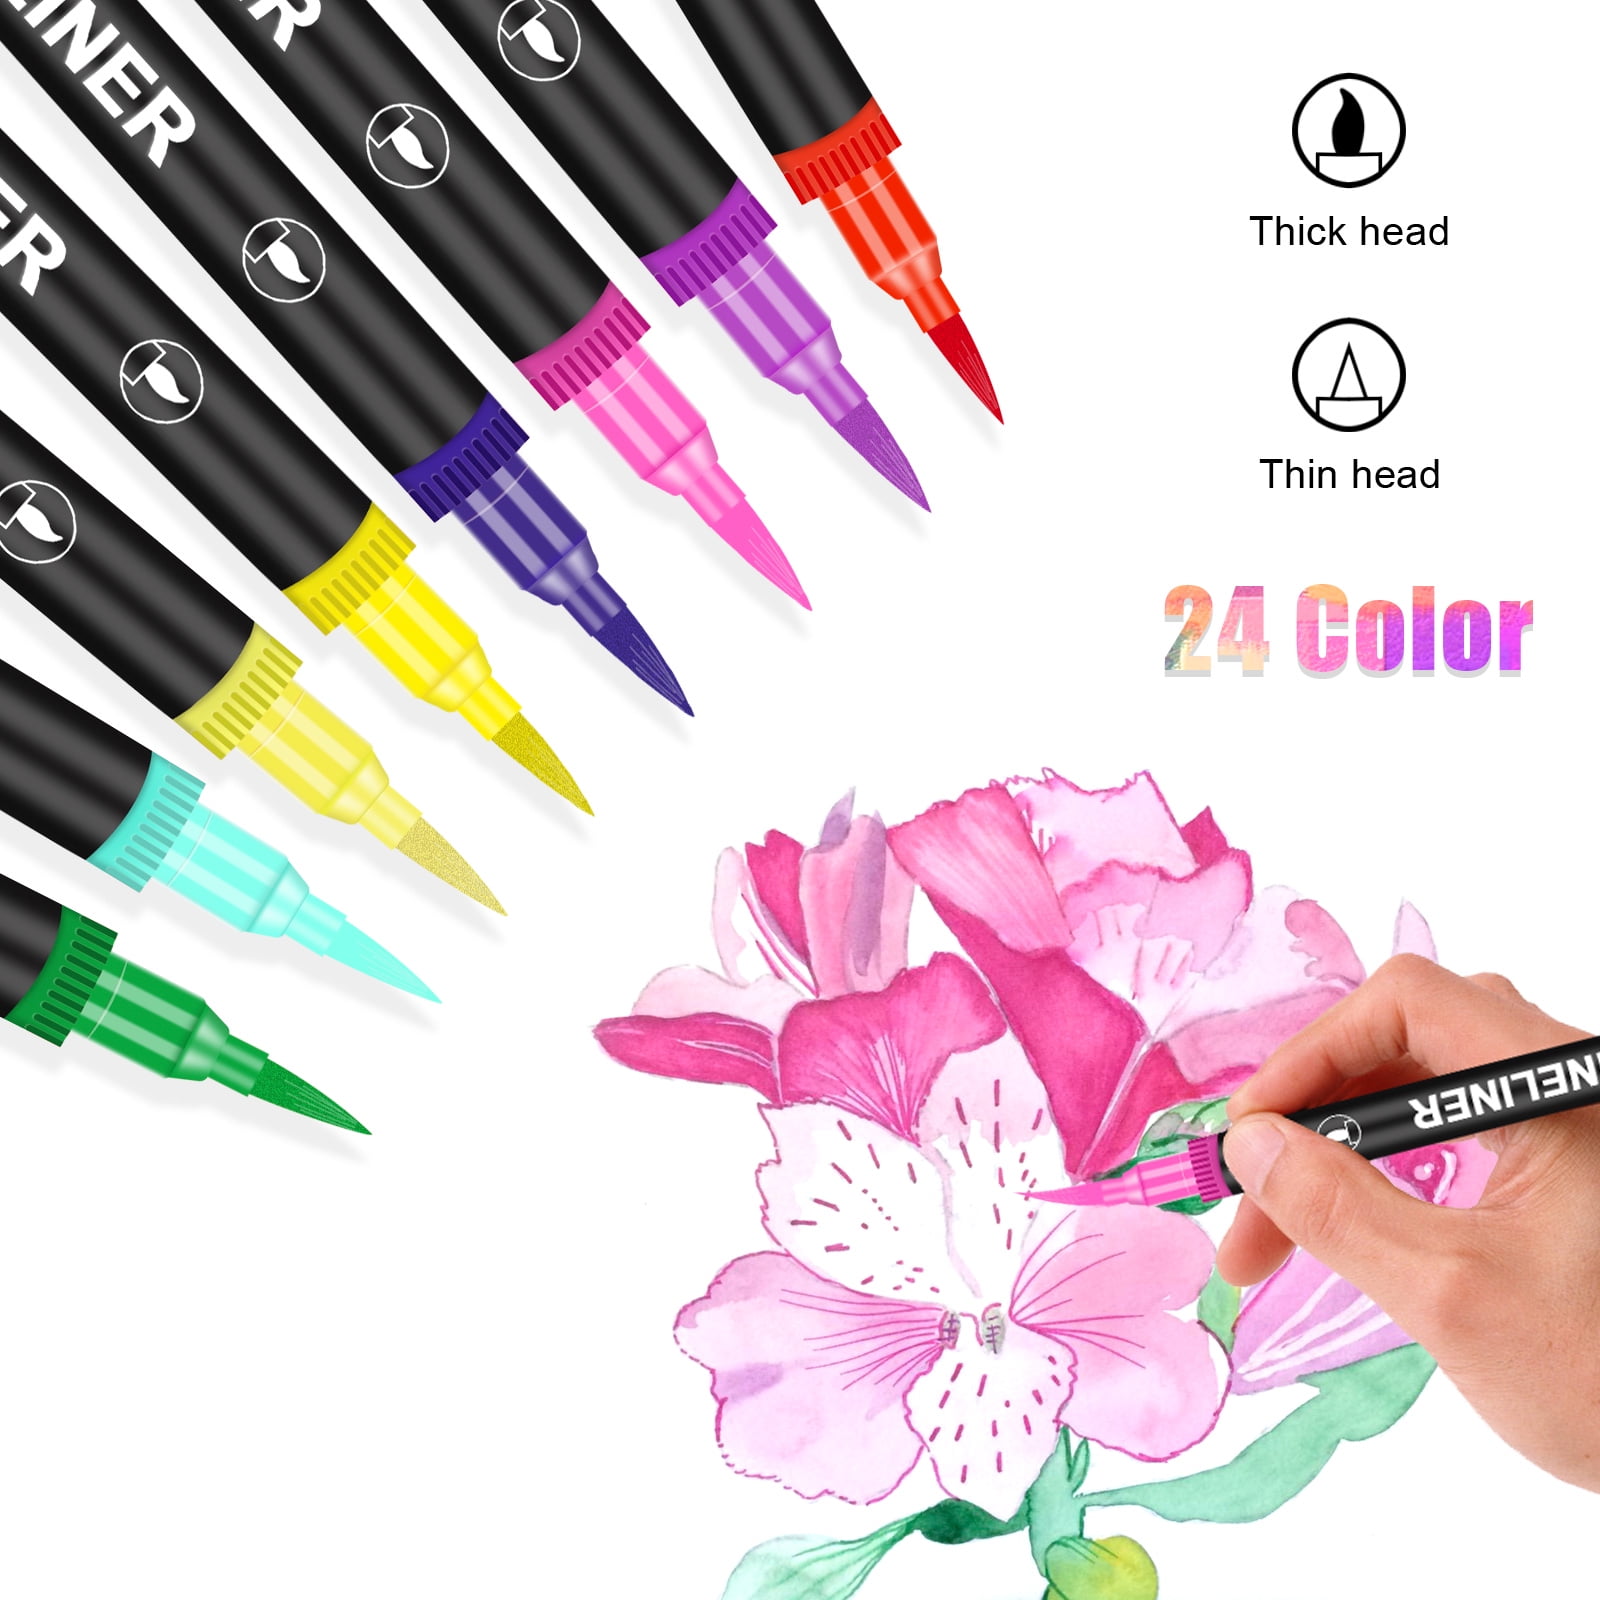 40-color Alcohol Marker Art Marker Set, Dual-head Pen Tip, Waterproof And  Quick-drying And Non-toxic, Suitable For Adult Coloring, Beginners, Dyeing,  Writing, Marking, Diy Design, Can Be Used As Holiday Gifts, Student  Back-to-school